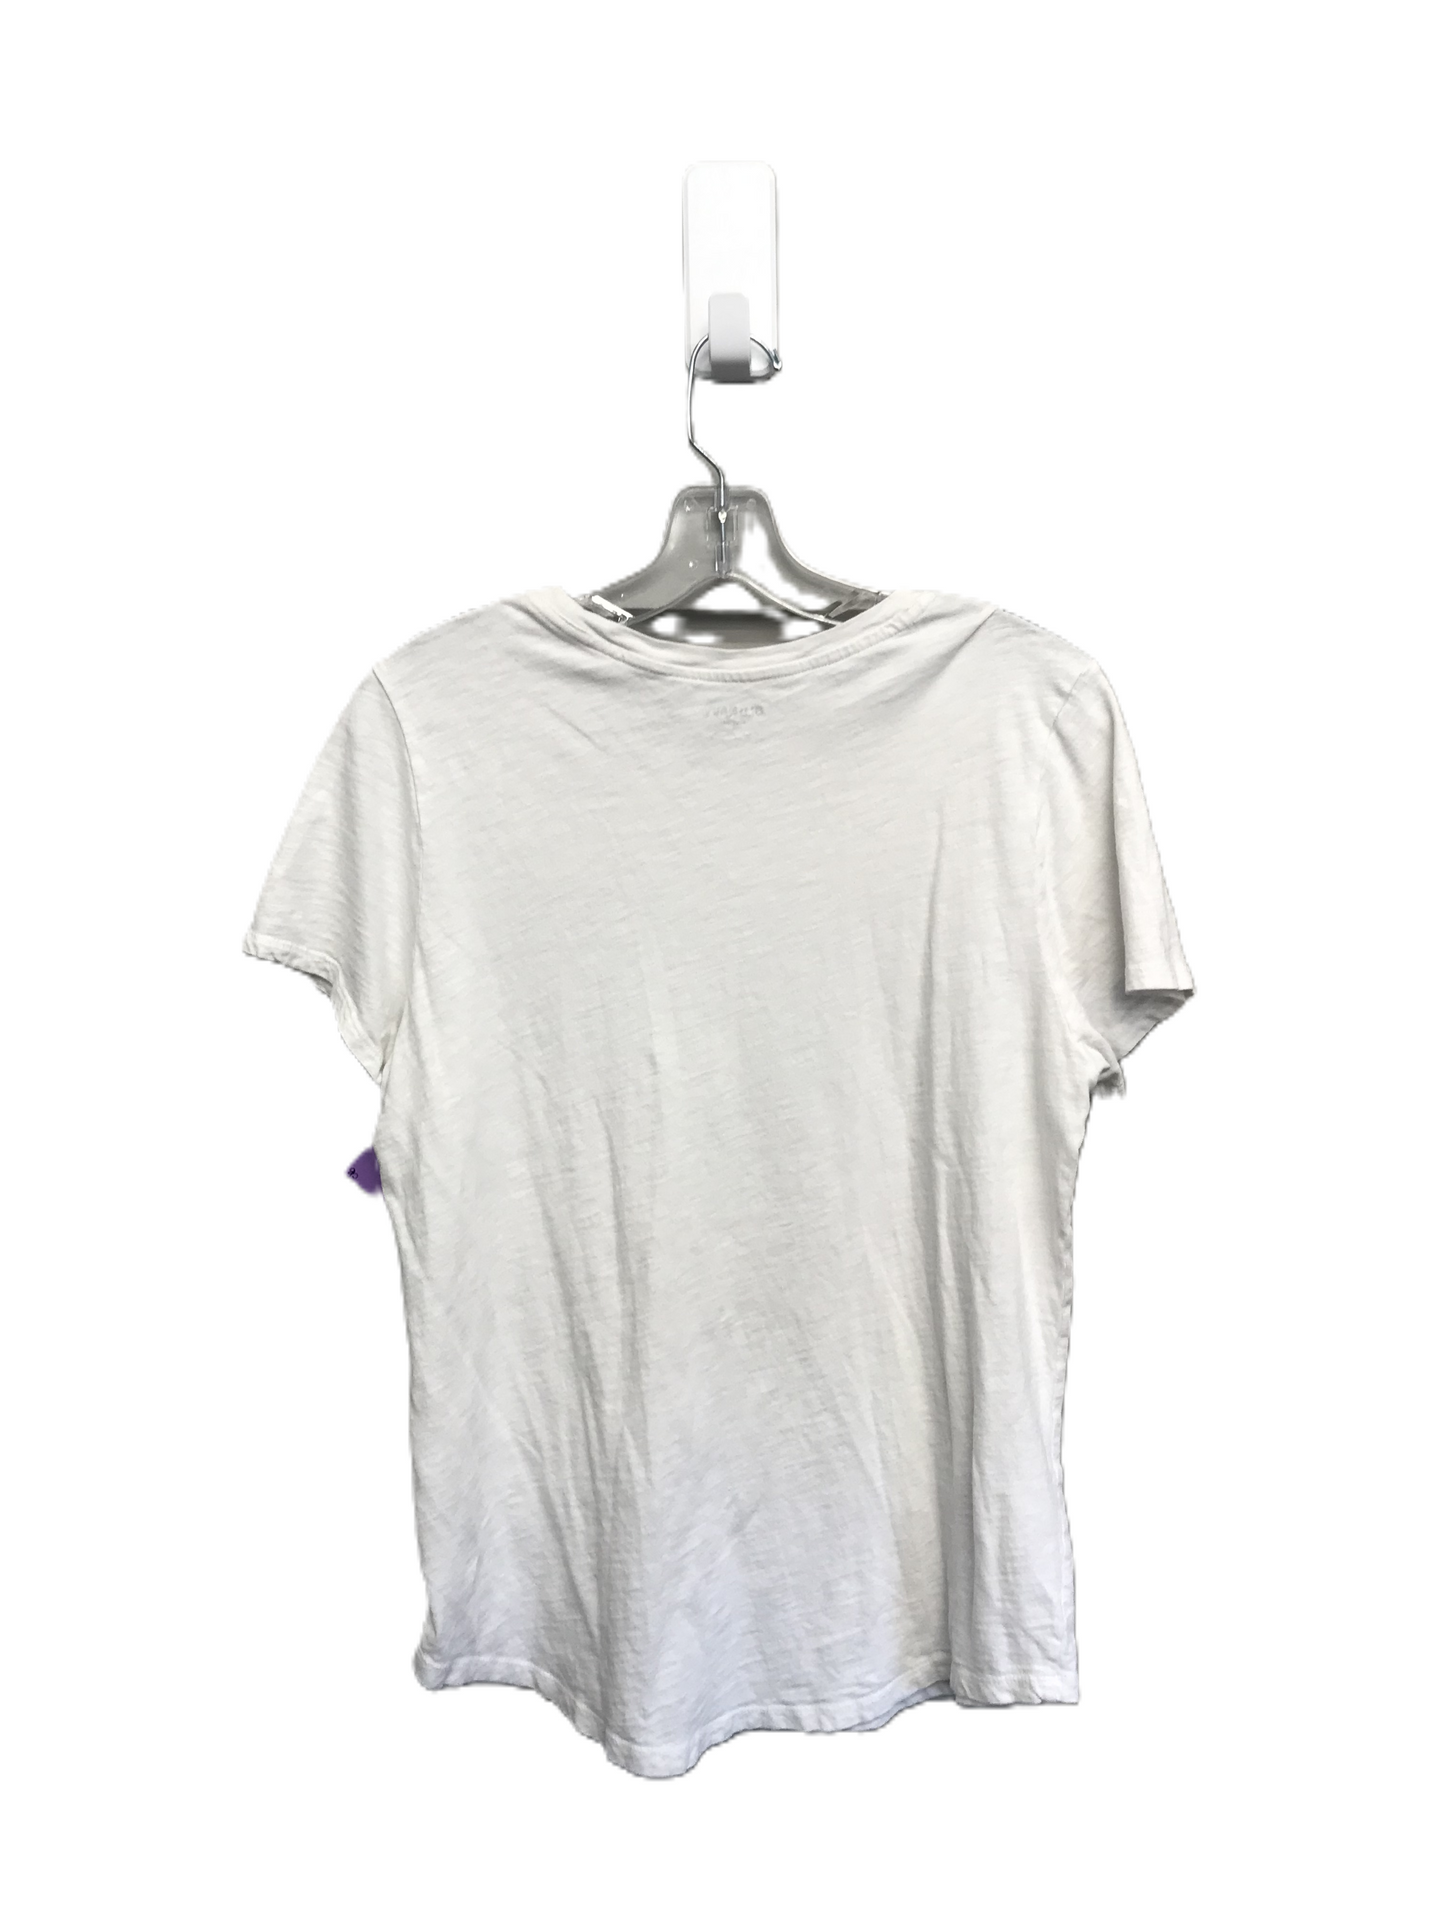 White Top Short Sleeve By Old Navy, Size: L